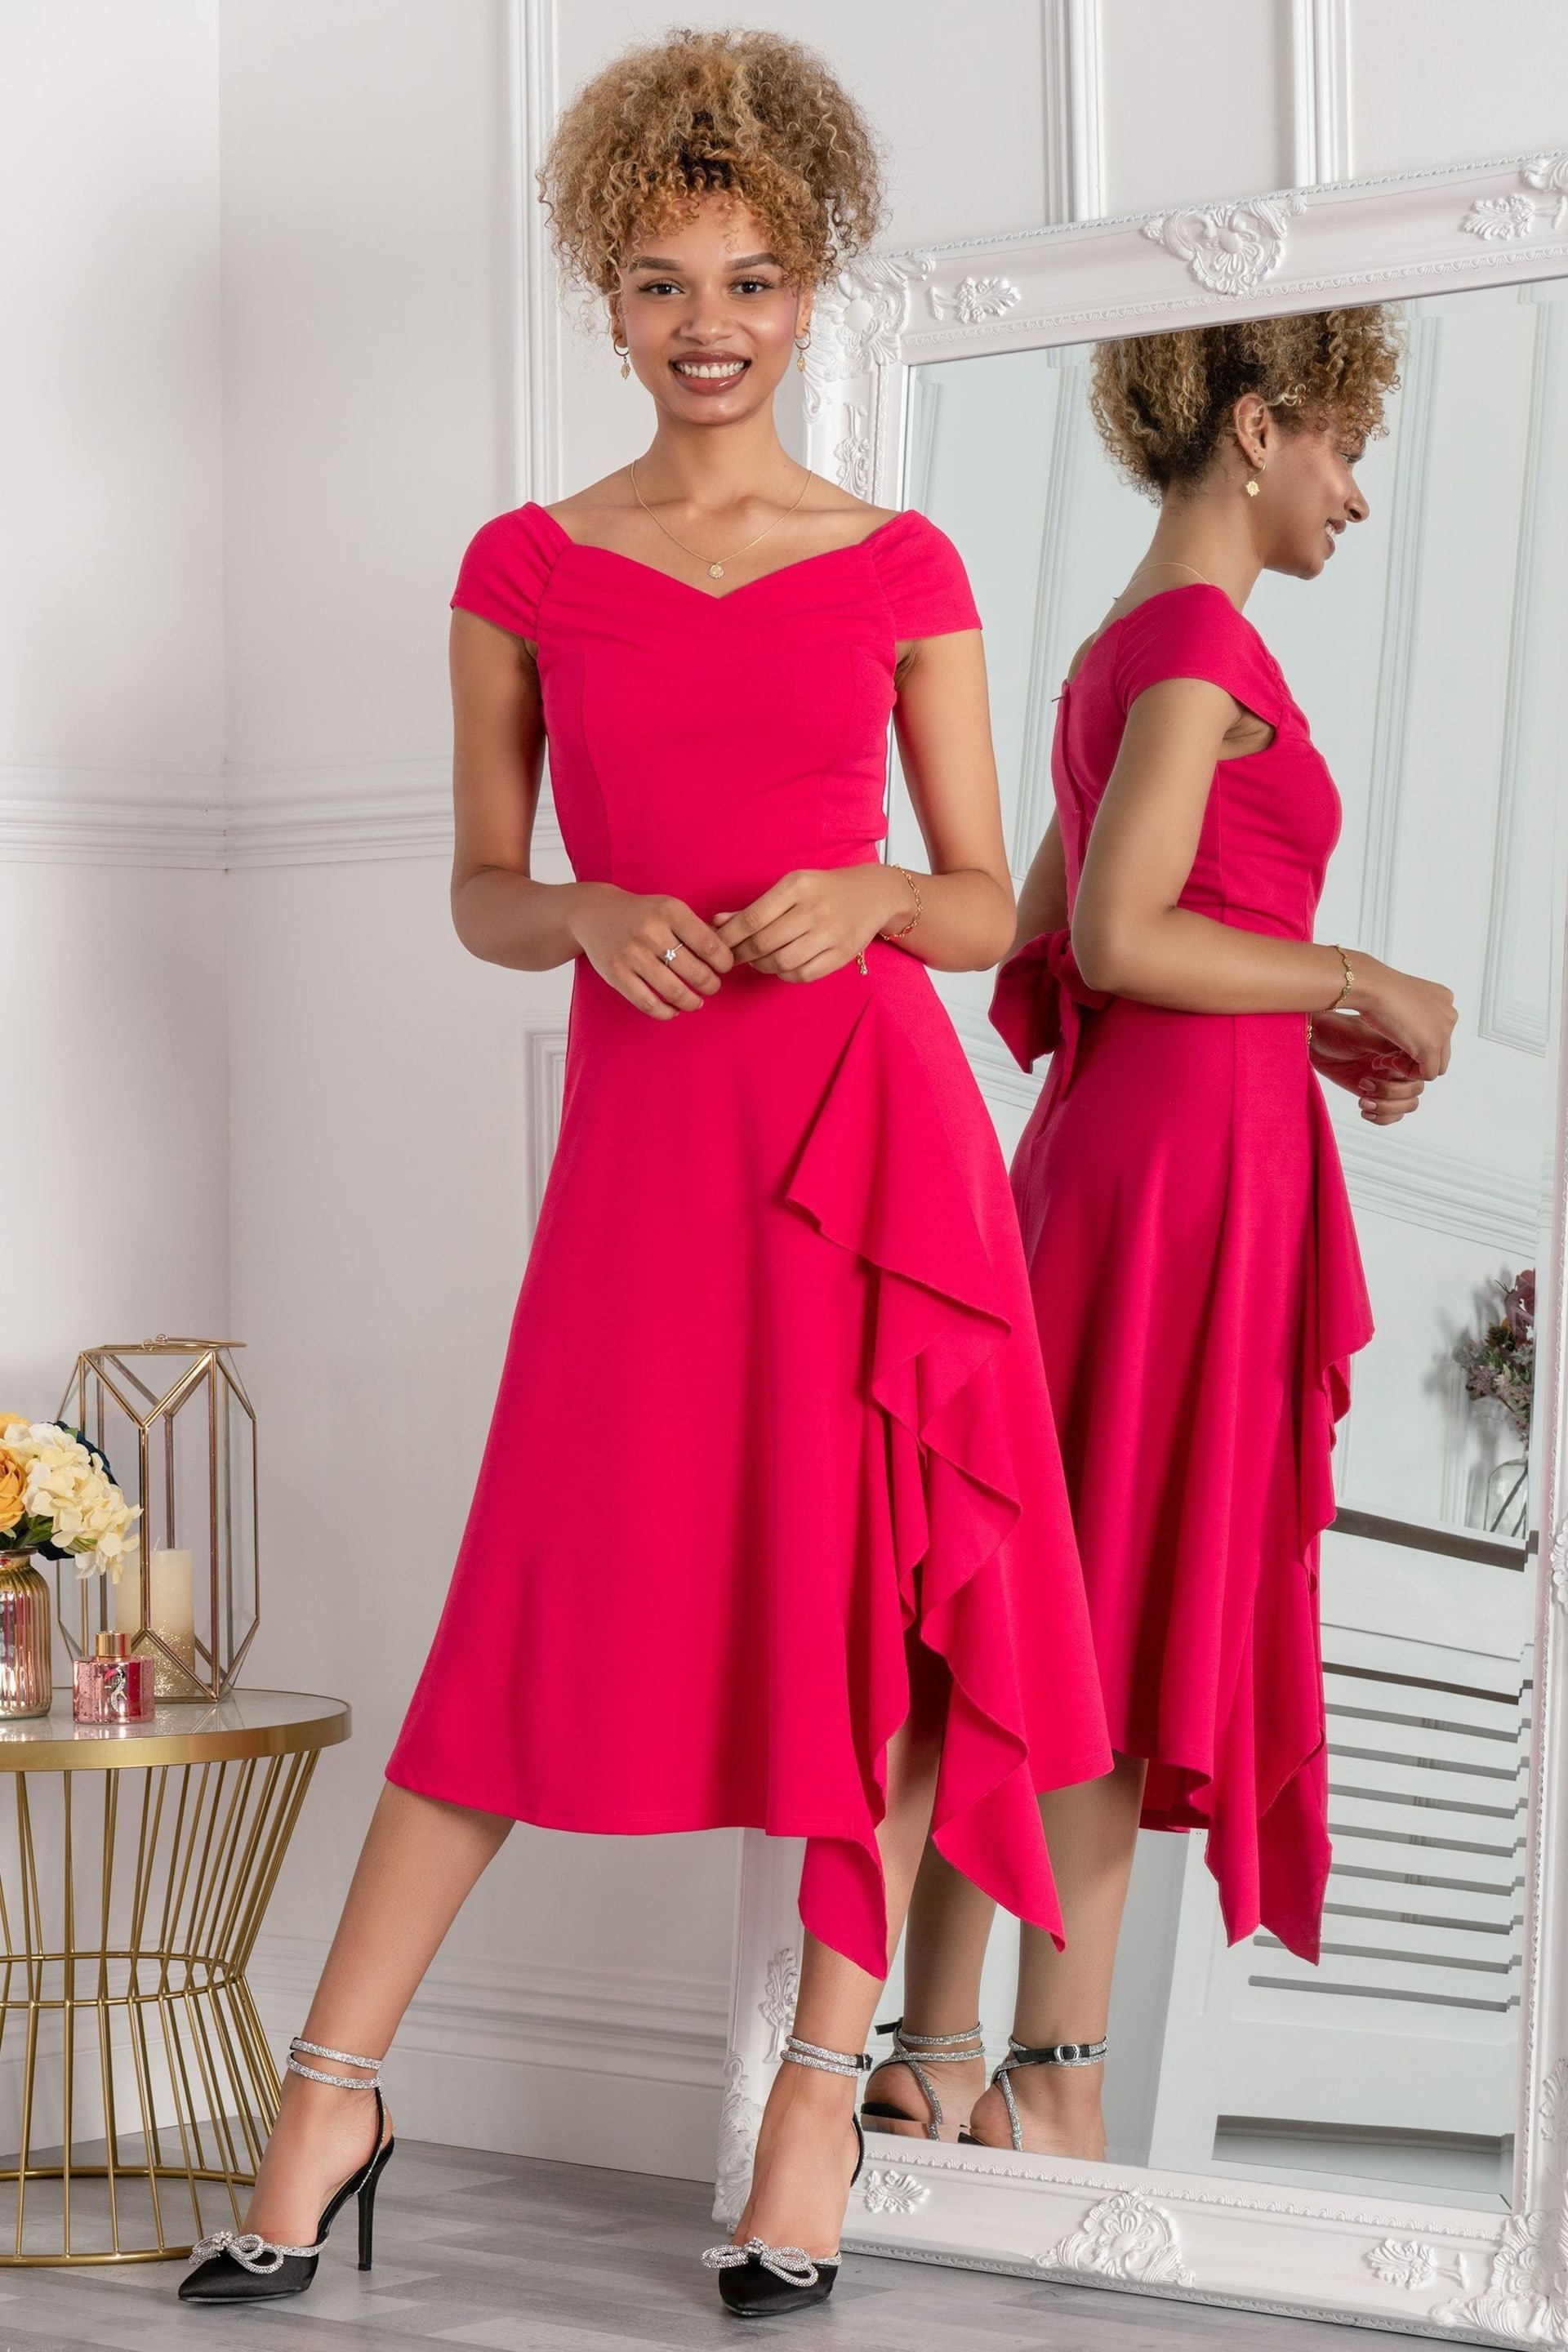 Jolie Moi Pink Desiree Frill Fit & Flare Dress - Image 4 of 5